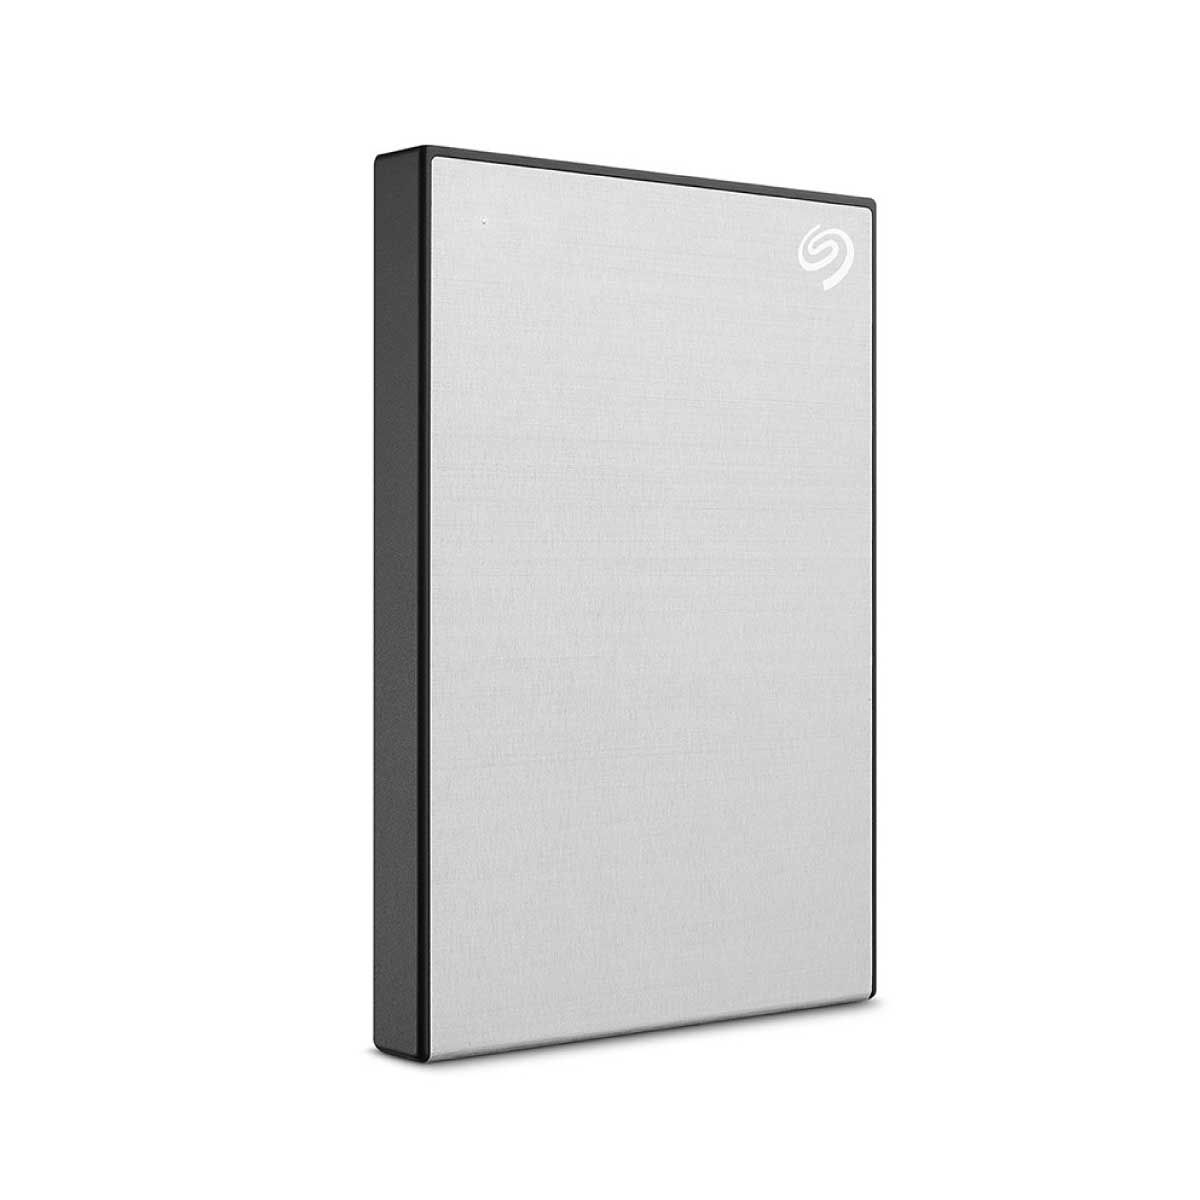 2 TB PORTABLE HDD (ฮาร์ดดิสก์พกพา) SEAGATE ONE TOUCH WITH PASSWORD (SILVER) (STKY2000401)